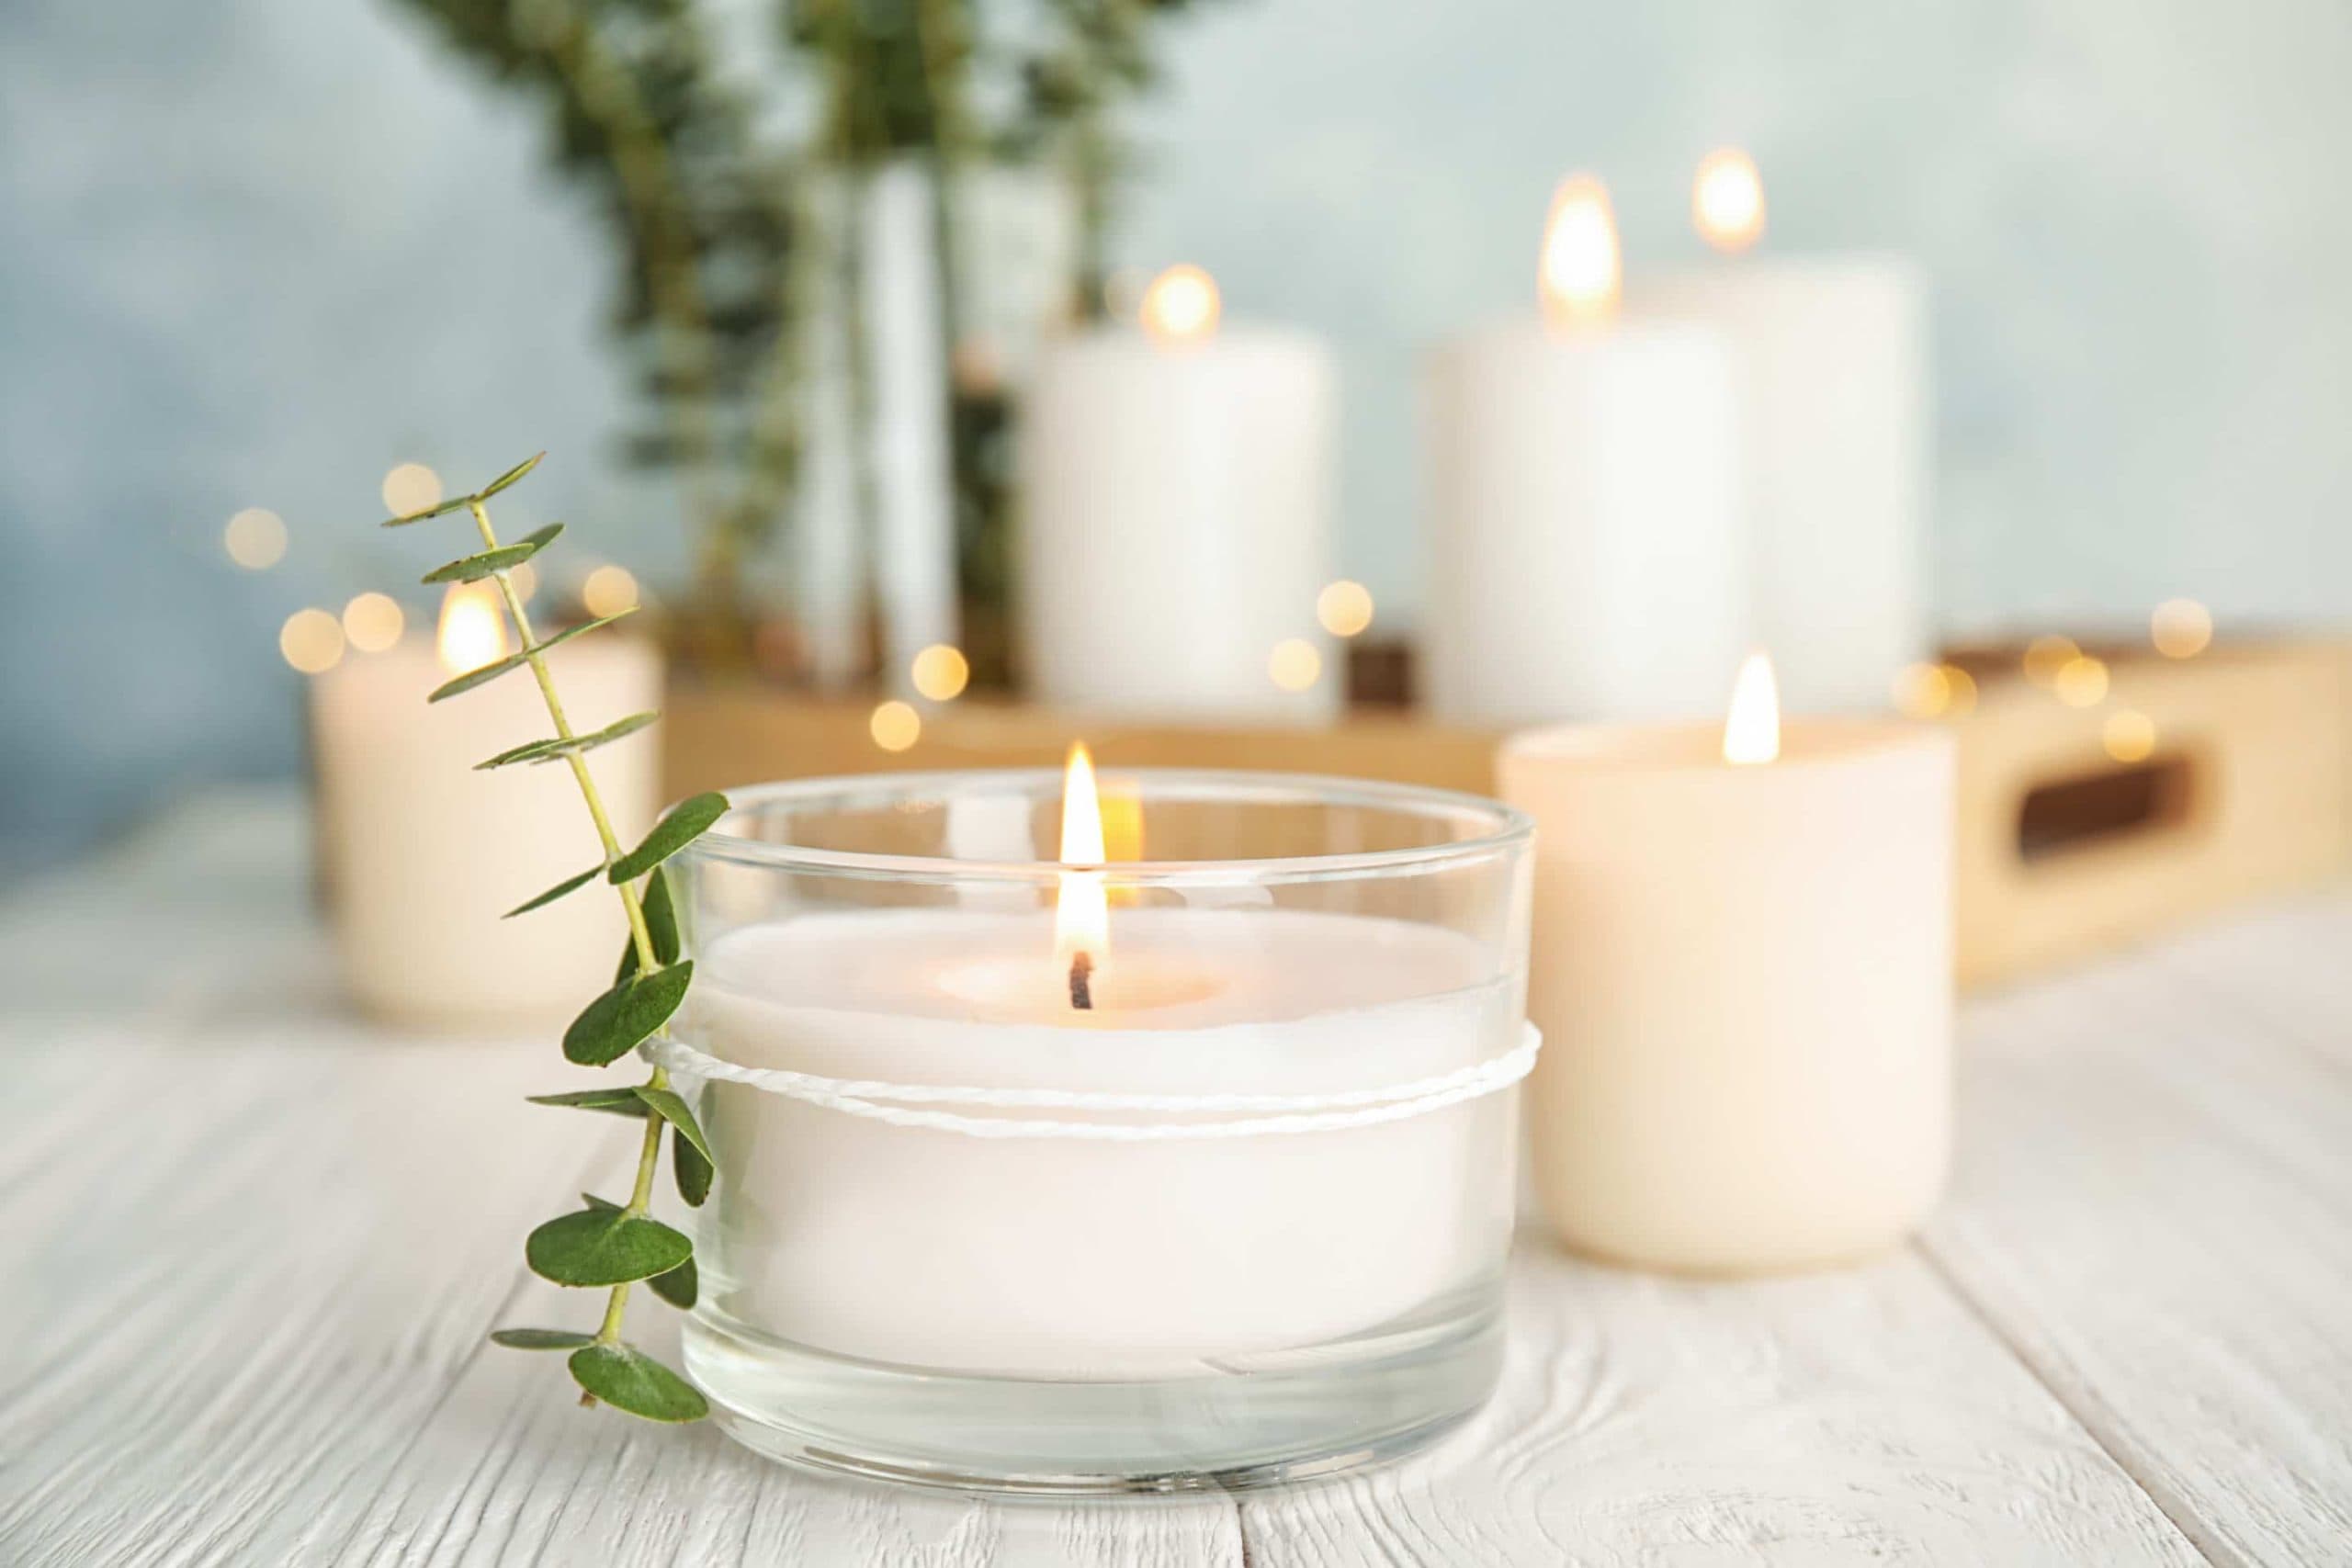 DIY Candle Recipe Using Natural Ingredients - DIY Recipe Video Included